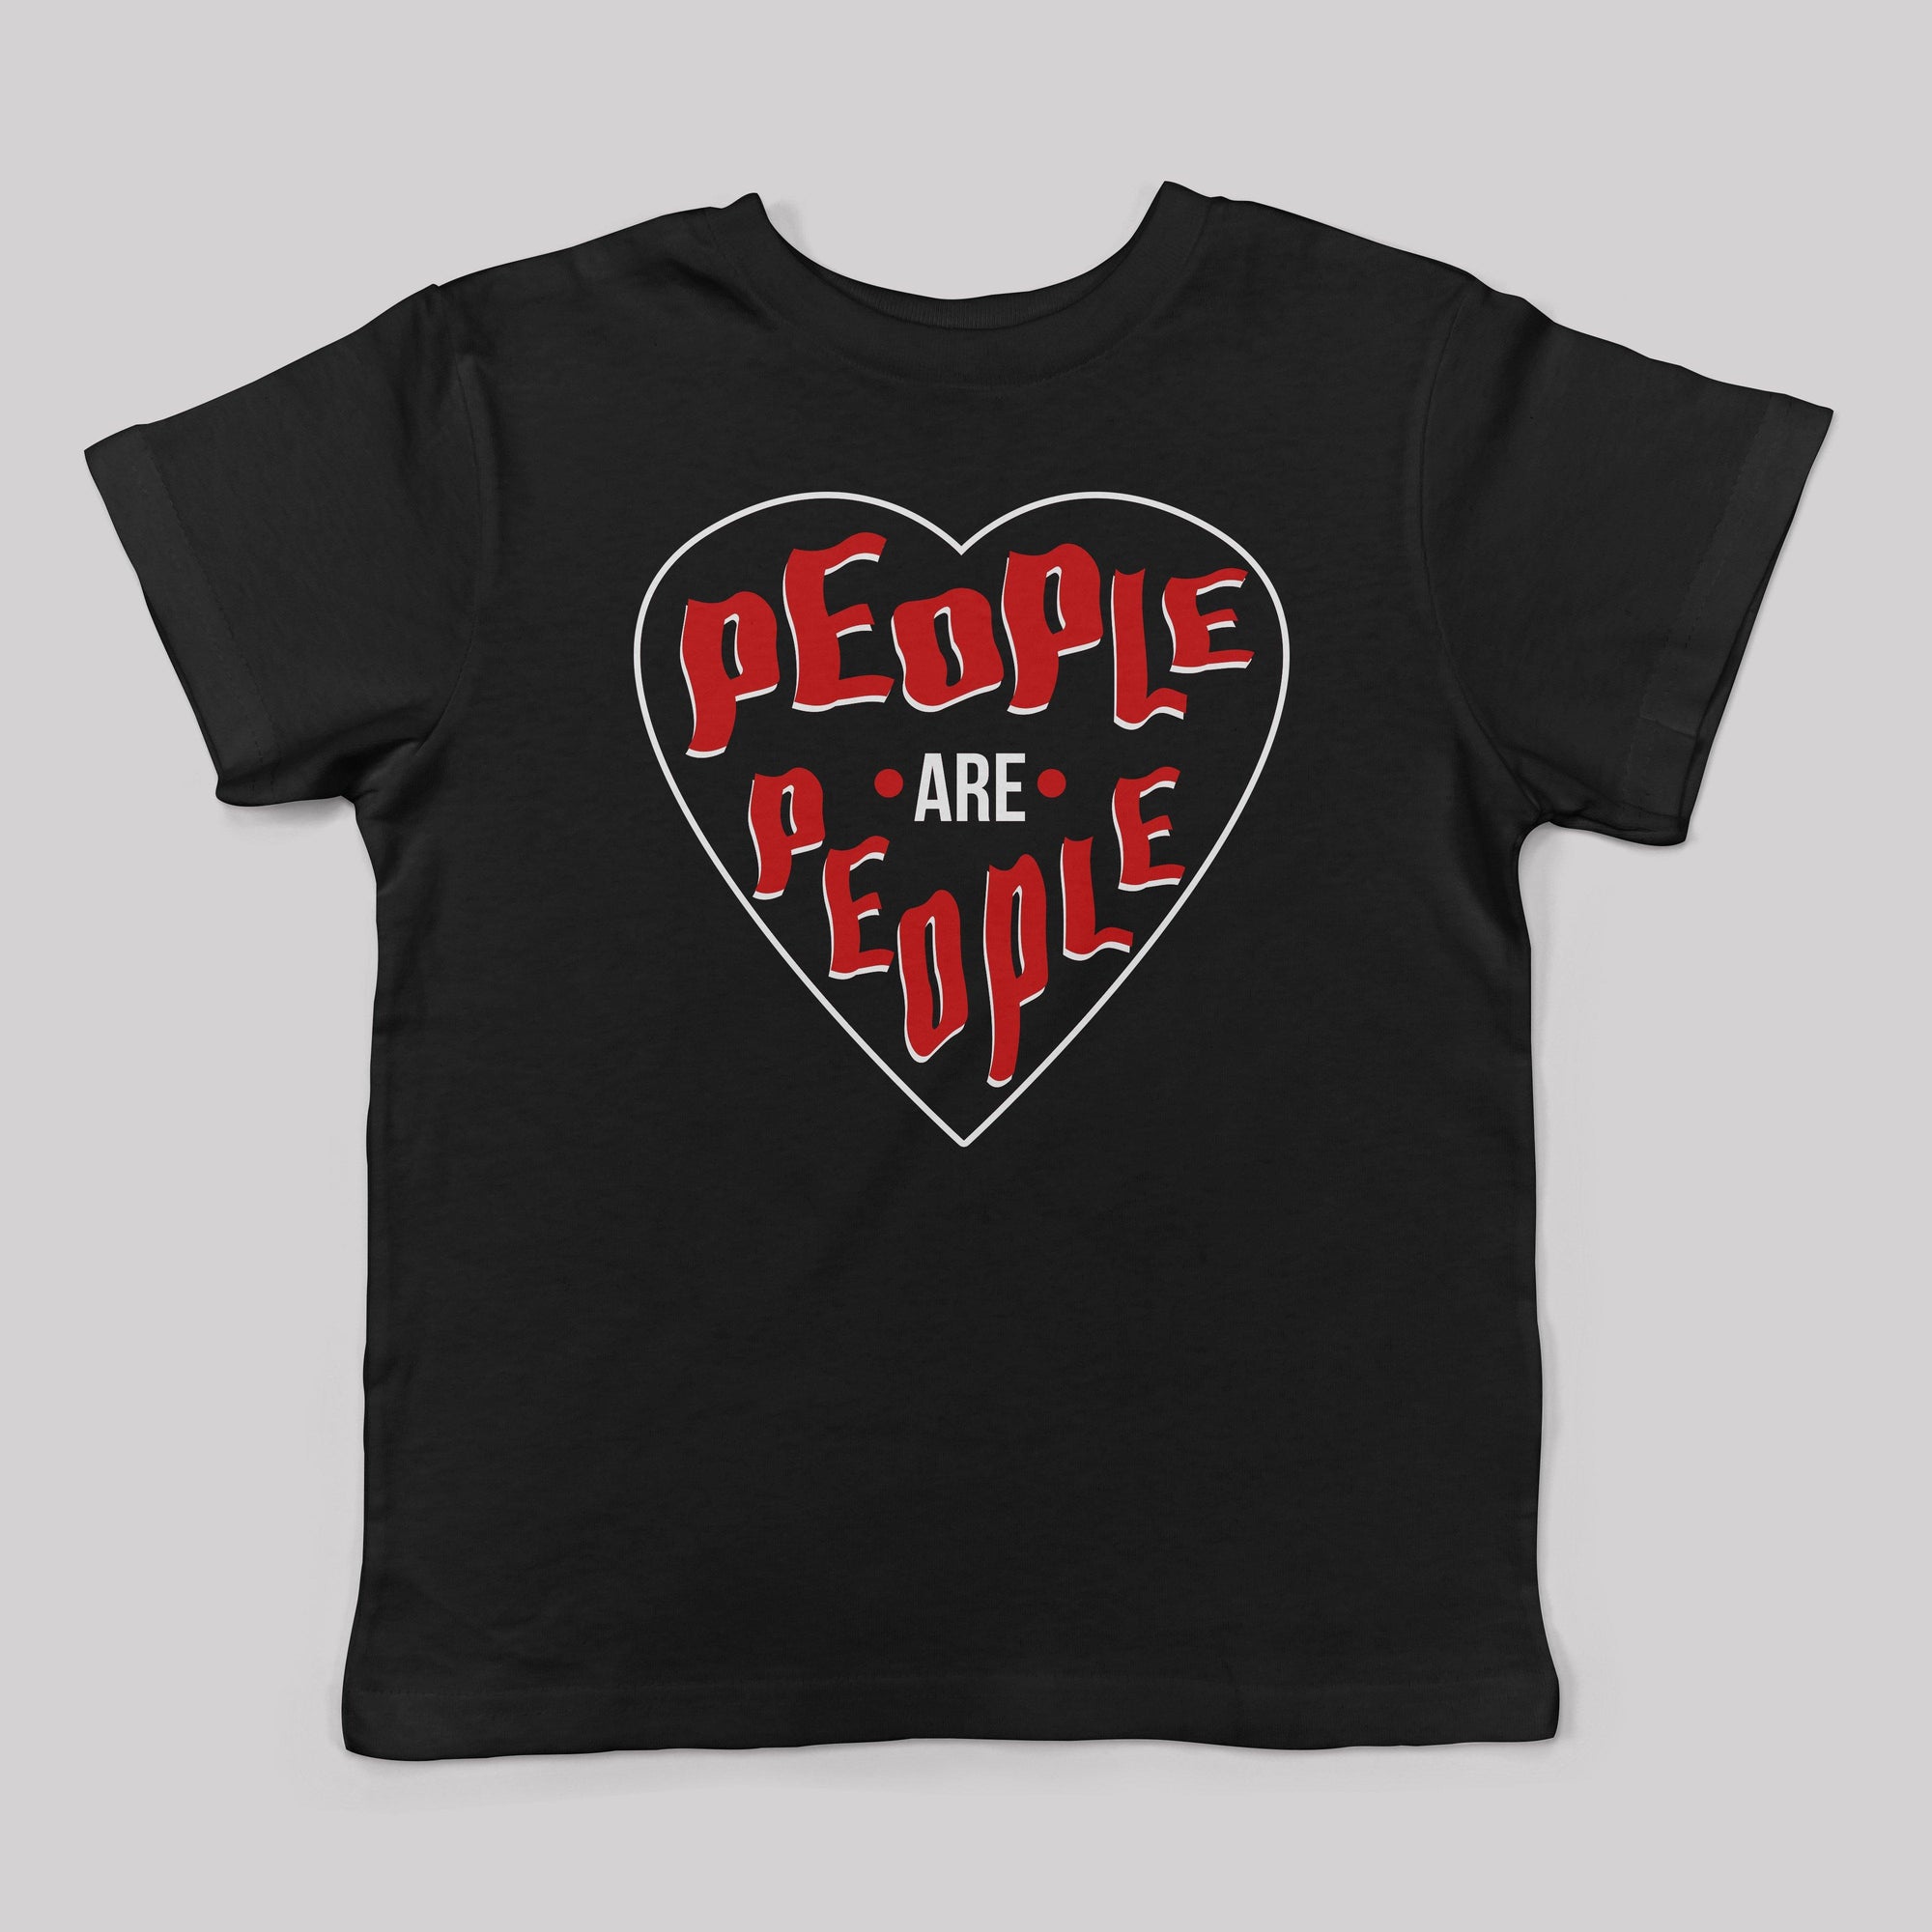 &quot;People Are People&quot; Tee for Kids - Baby Teith